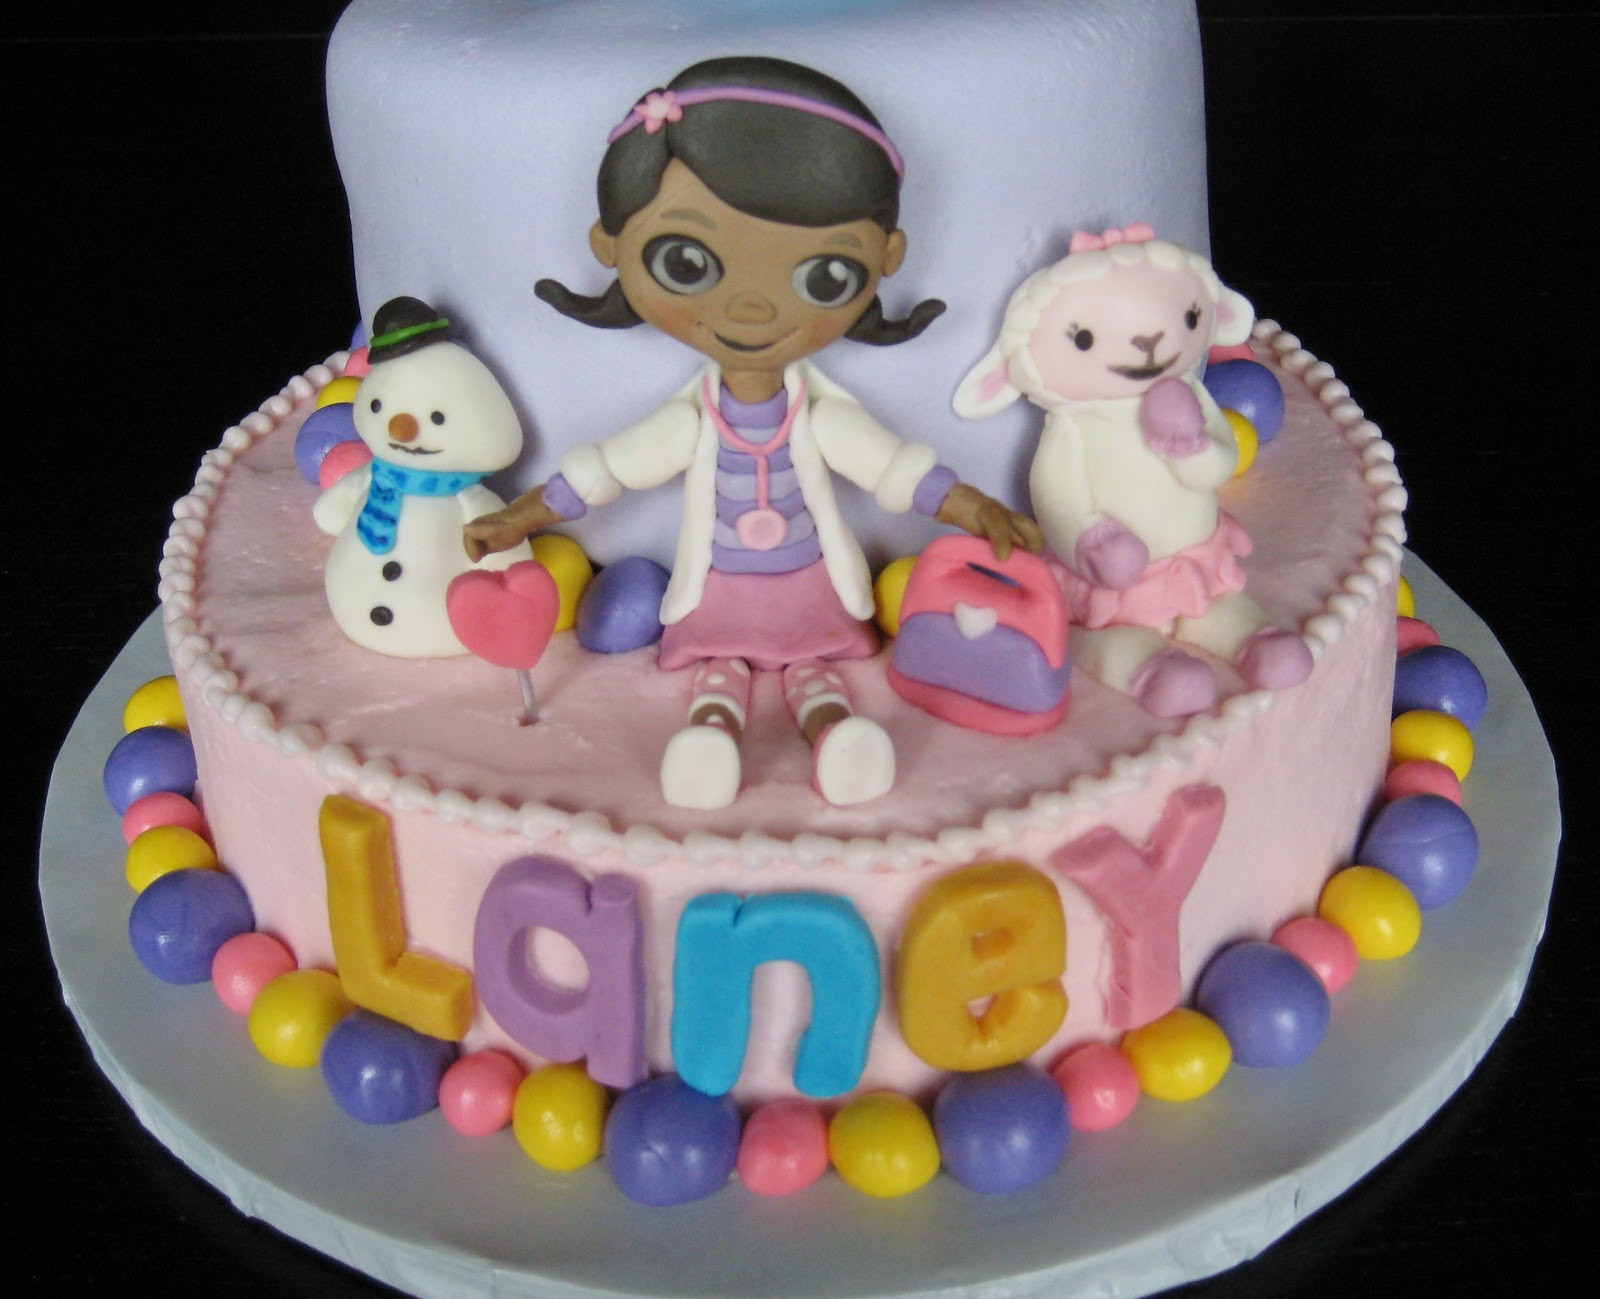 Doc Mcstuffin Birthday Cakes
 Custom Cakes by Julie Doc McStuffins Cake II